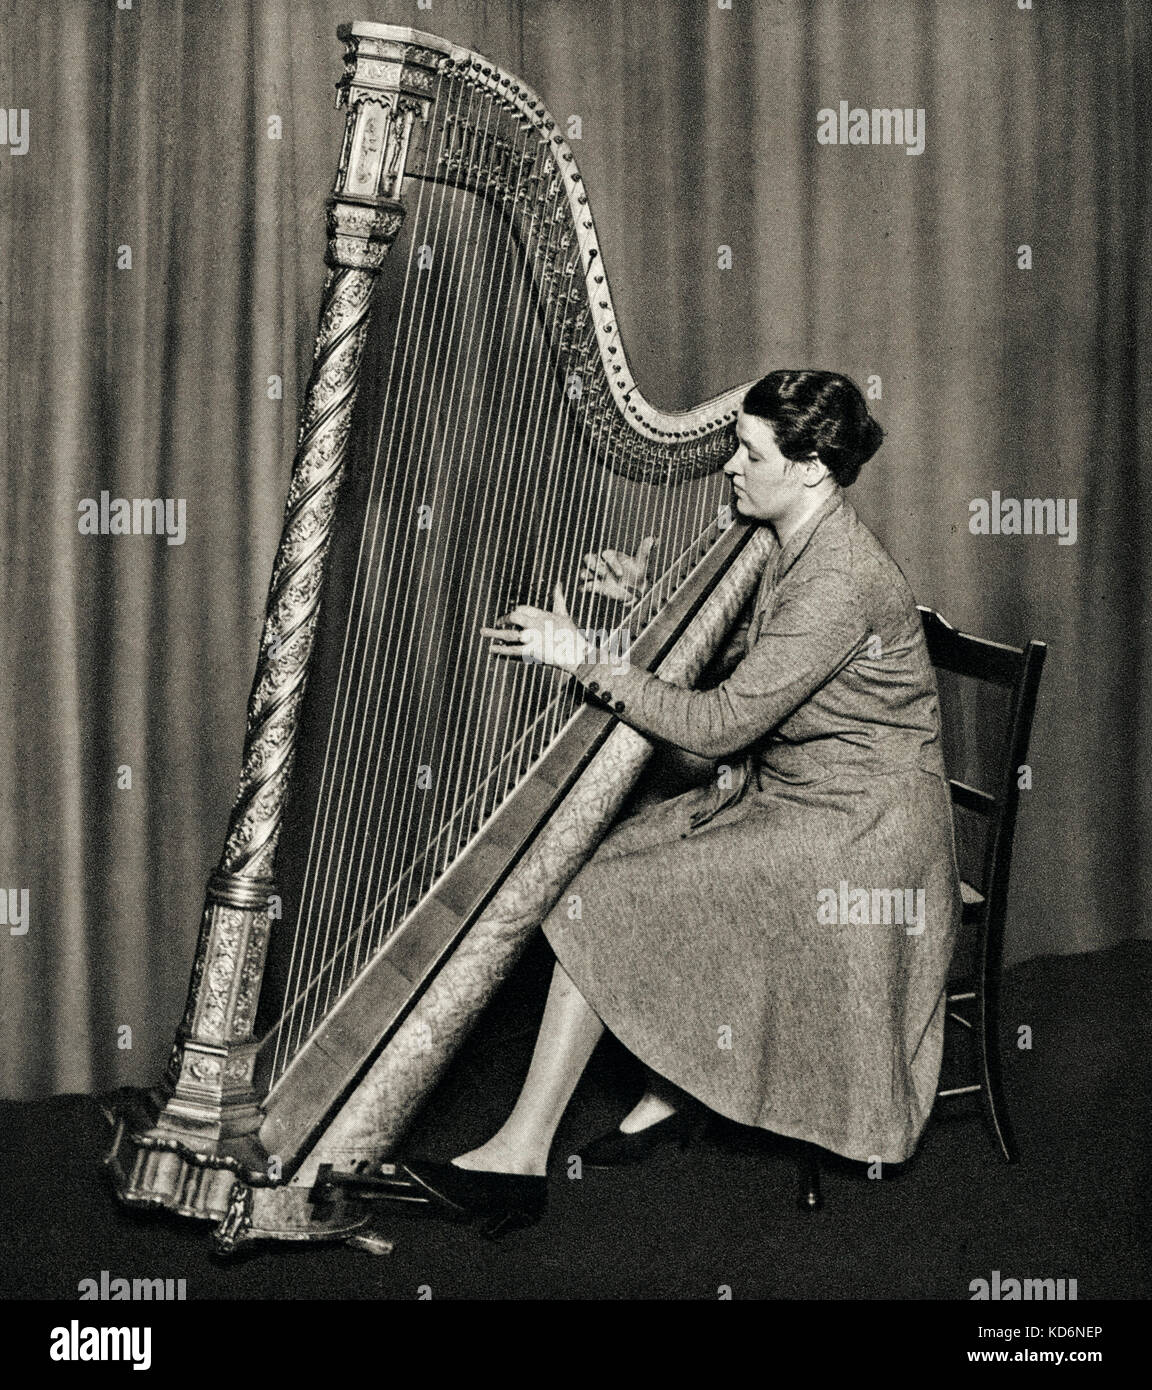 Sidonie Goossens playing the harp in the late 1930s. 1899 - December 2004.  Fifth child from famous musical family. Harpist Stock Photo - Alamy